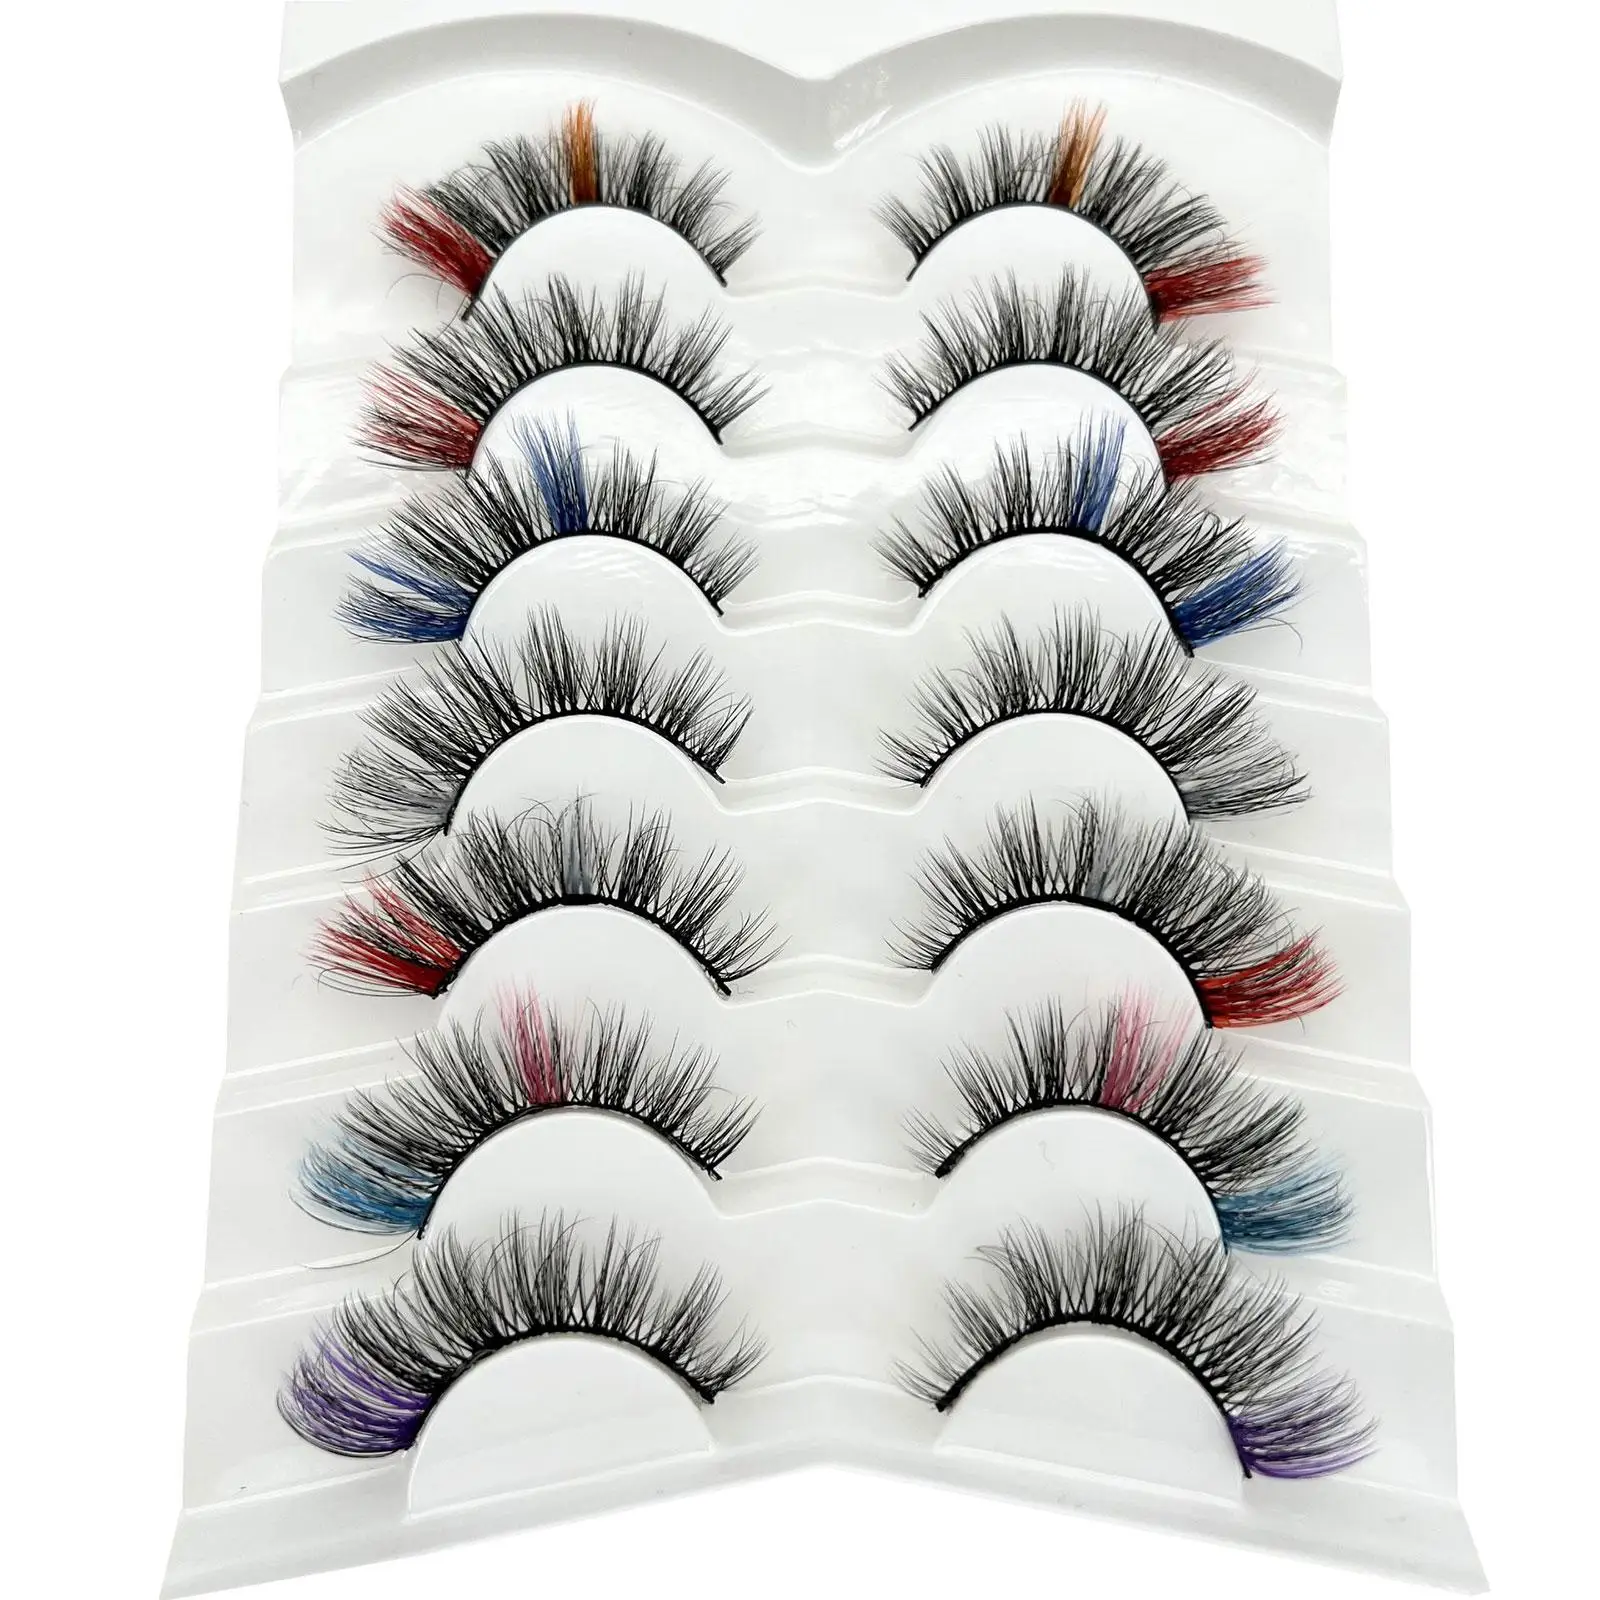 False Lashes with Color Makeup Beauty Extension Tools Soft for Thanksgiving